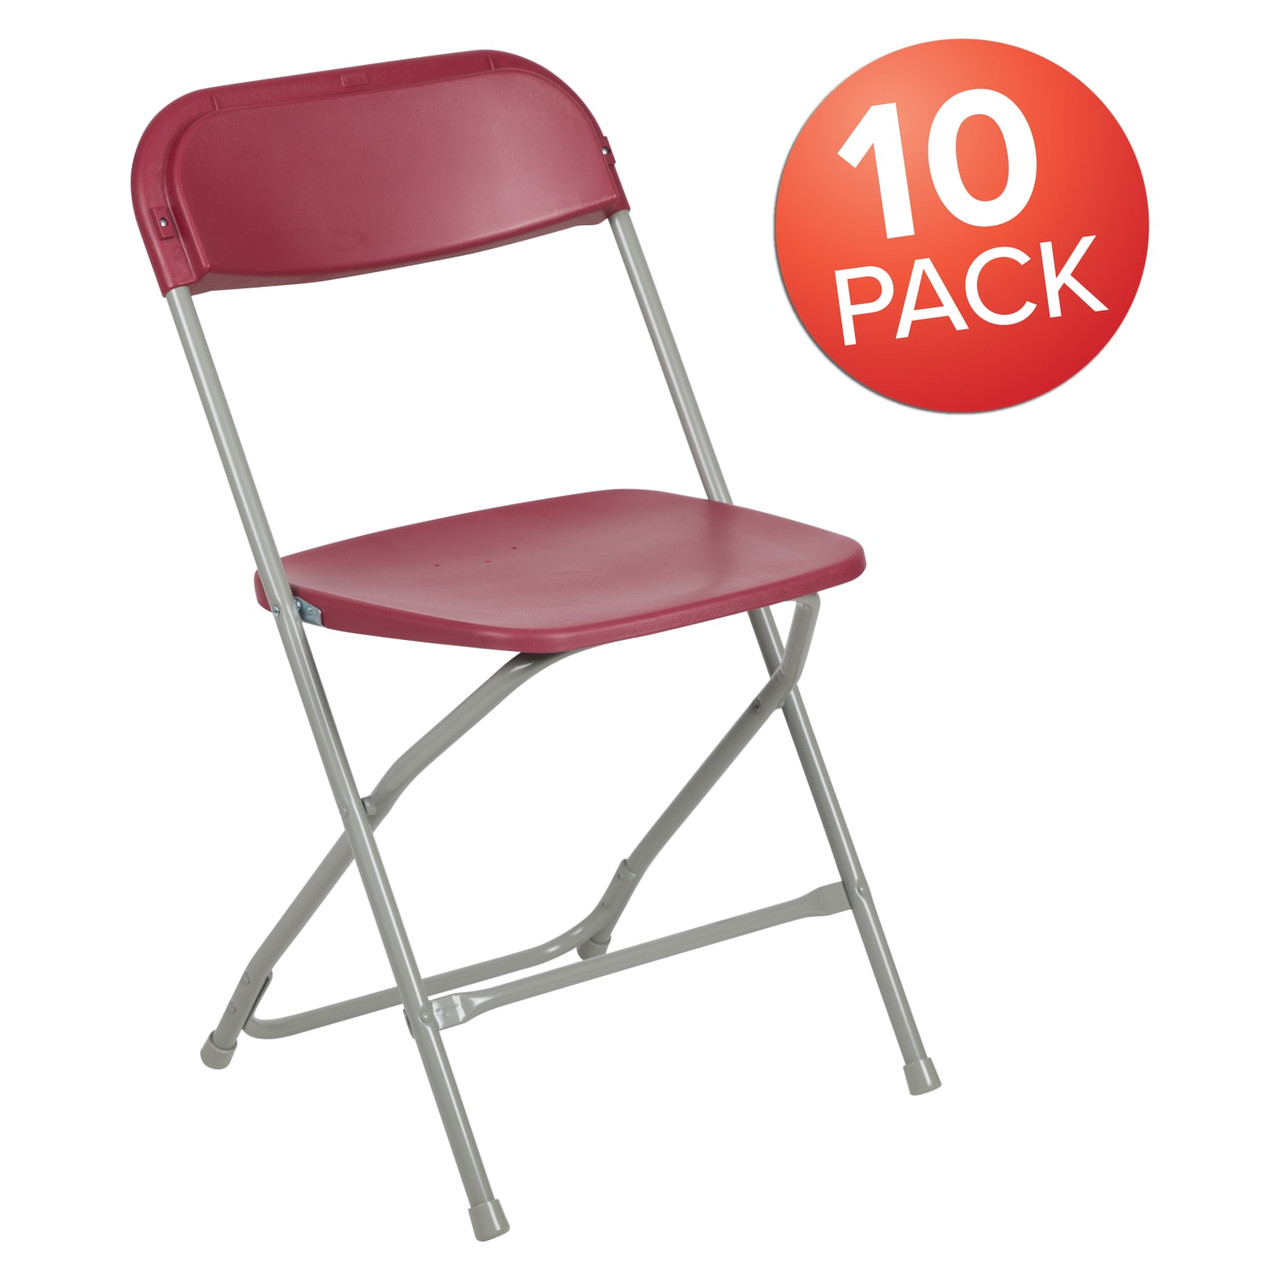 Hercules  Series Plastic Folding Chair - Red - 10 Pack 650LB Weight Capacity Comfortable Event Chair-Lightweight Folding Chair